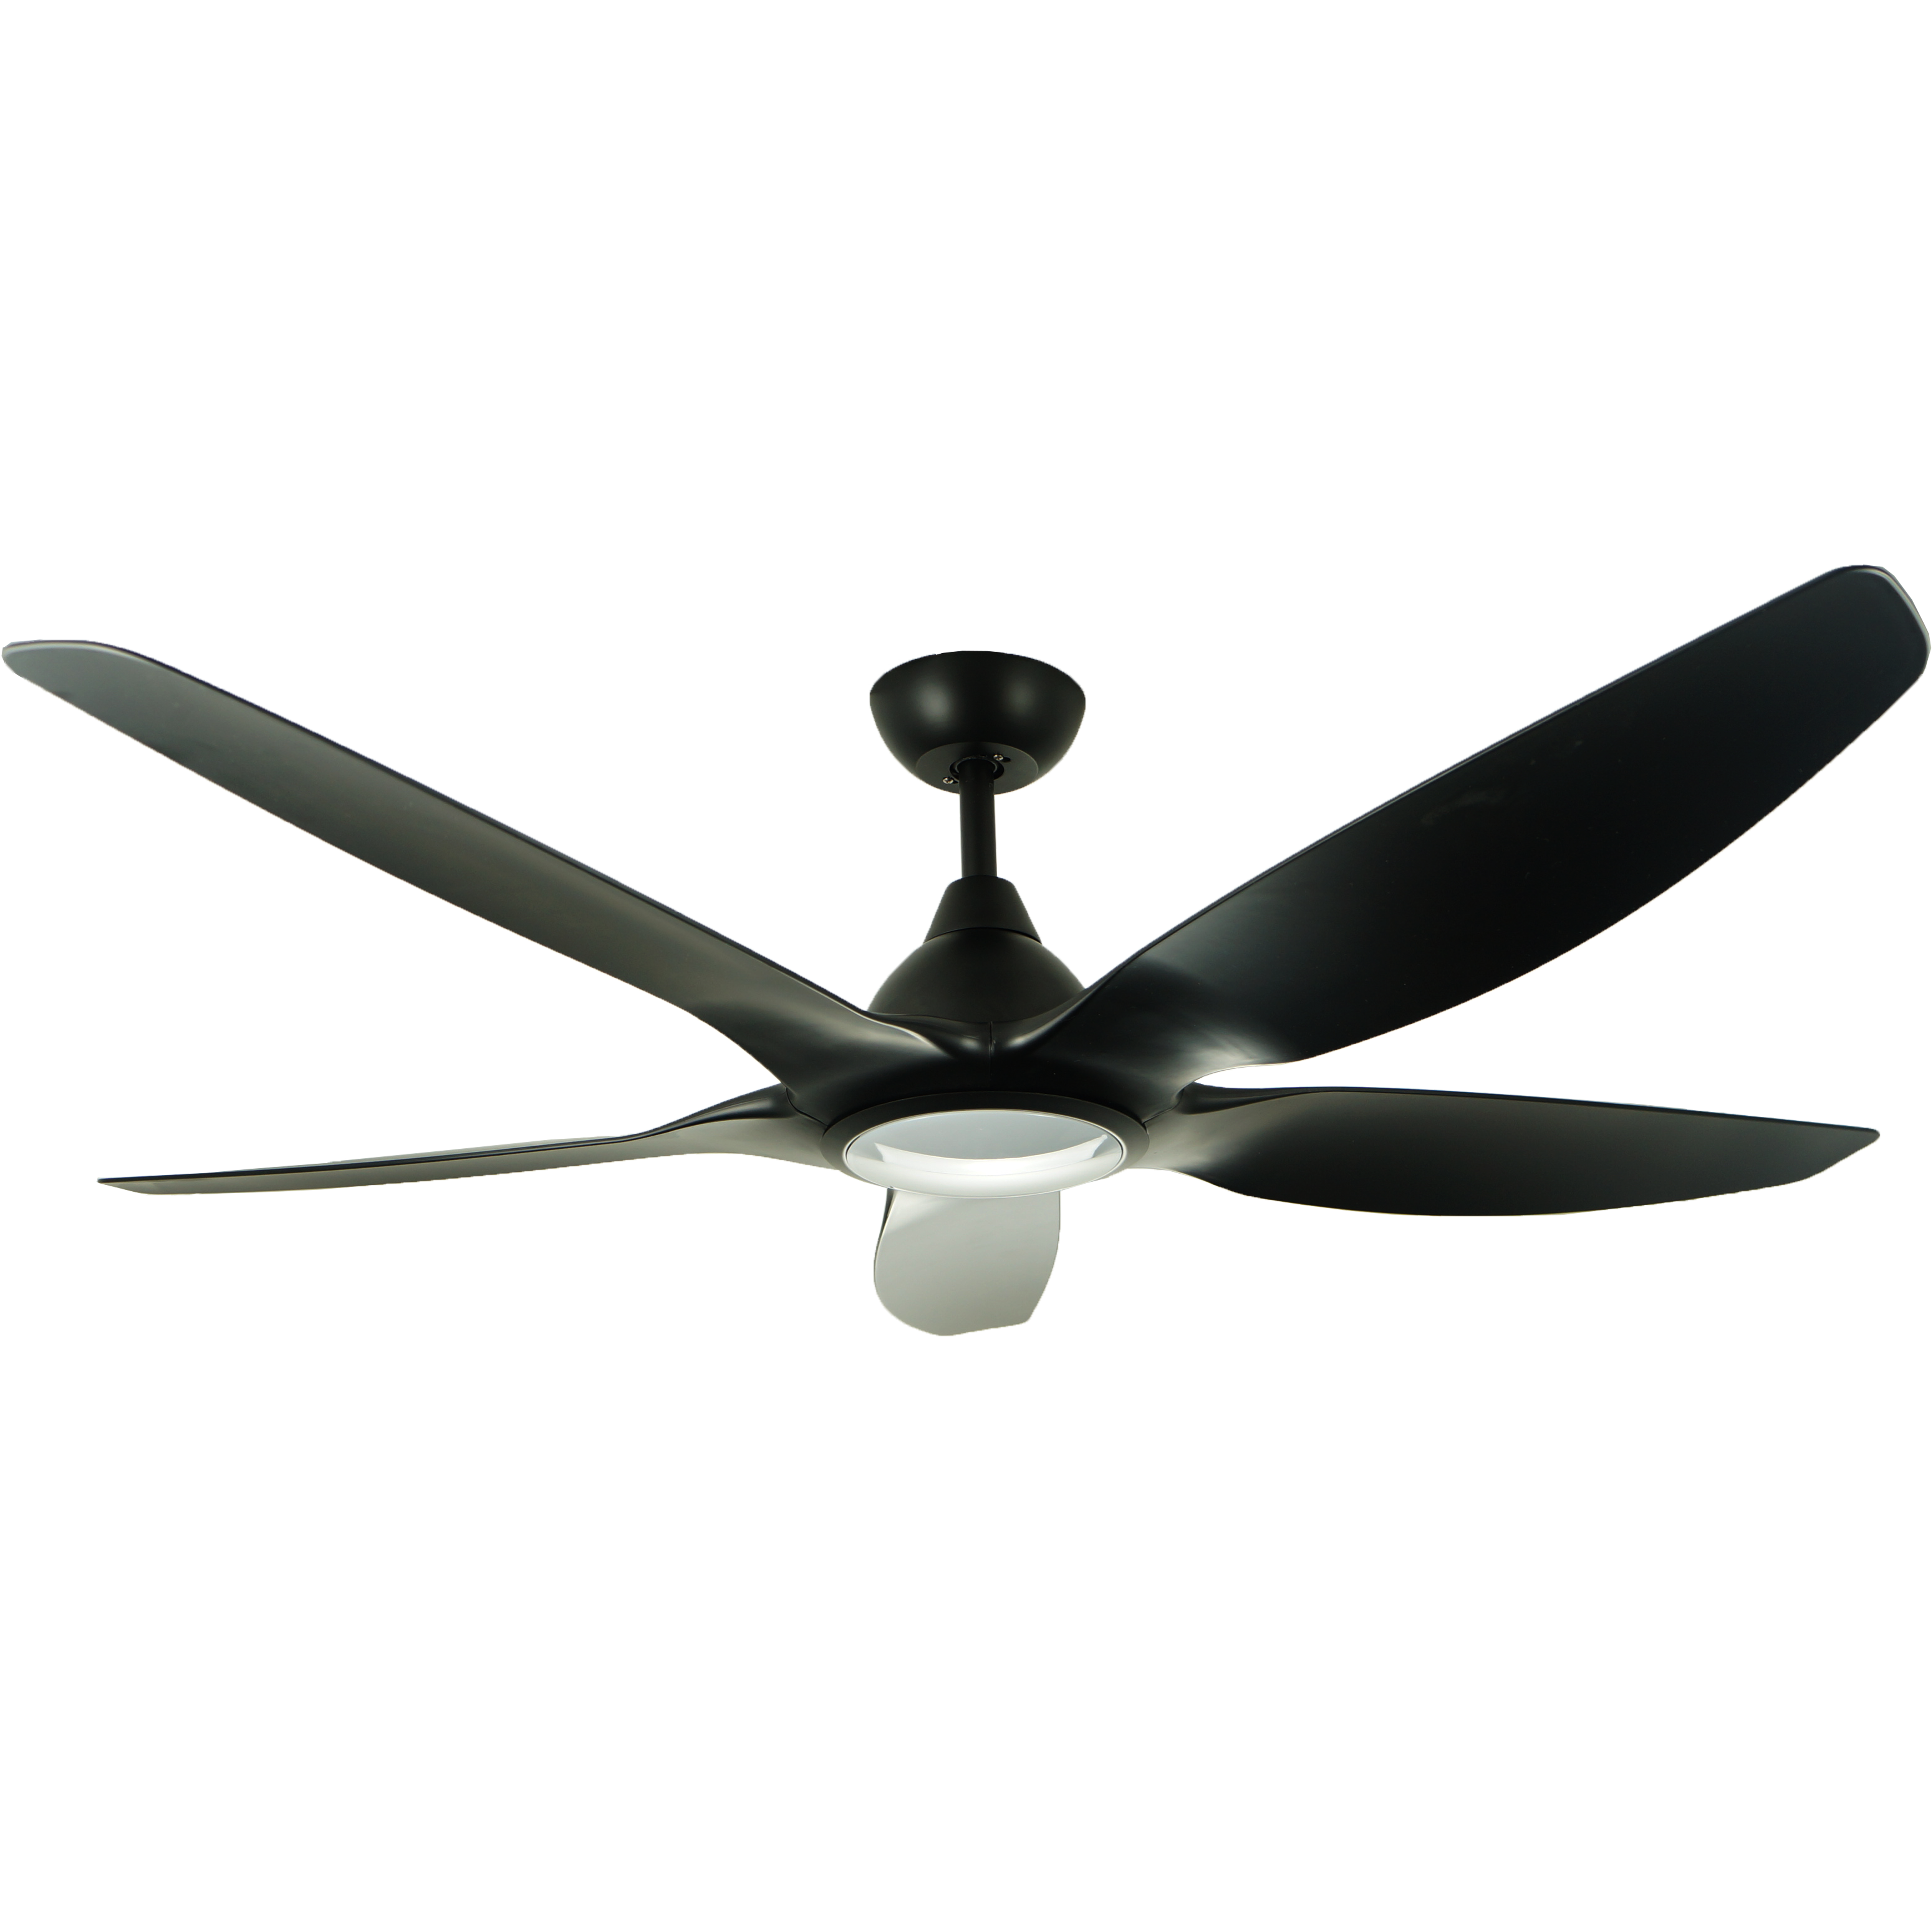 Electric Domestic Ceiling Fan Lamp for Home Decoration